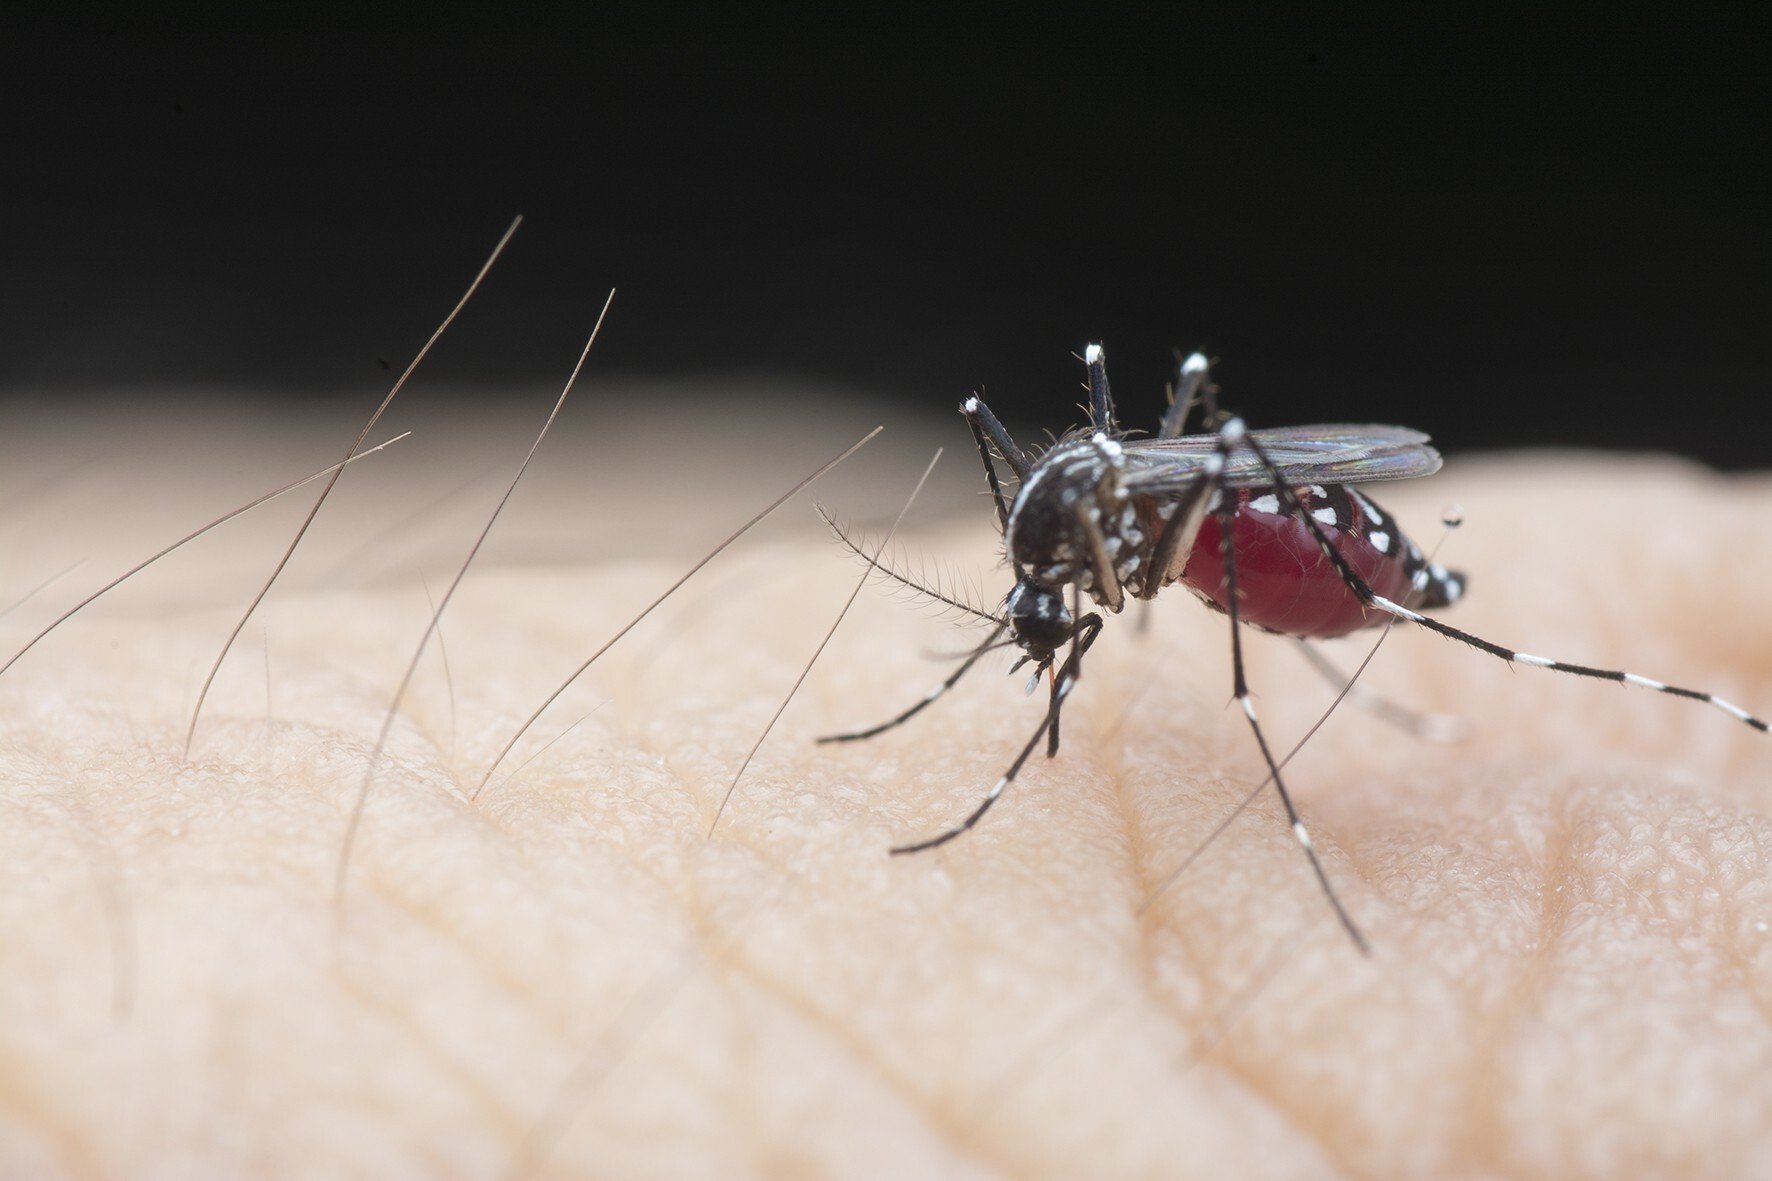 Mosquitoes injected with a natural bacterium called Wolbachia, which hinders the insect’s ability to transmit viruses including dengue, were released to breed and infect local populations in Yogyakarta, Indonesia, in a recently concluded trial. Photo: Getty Images/EyeEm